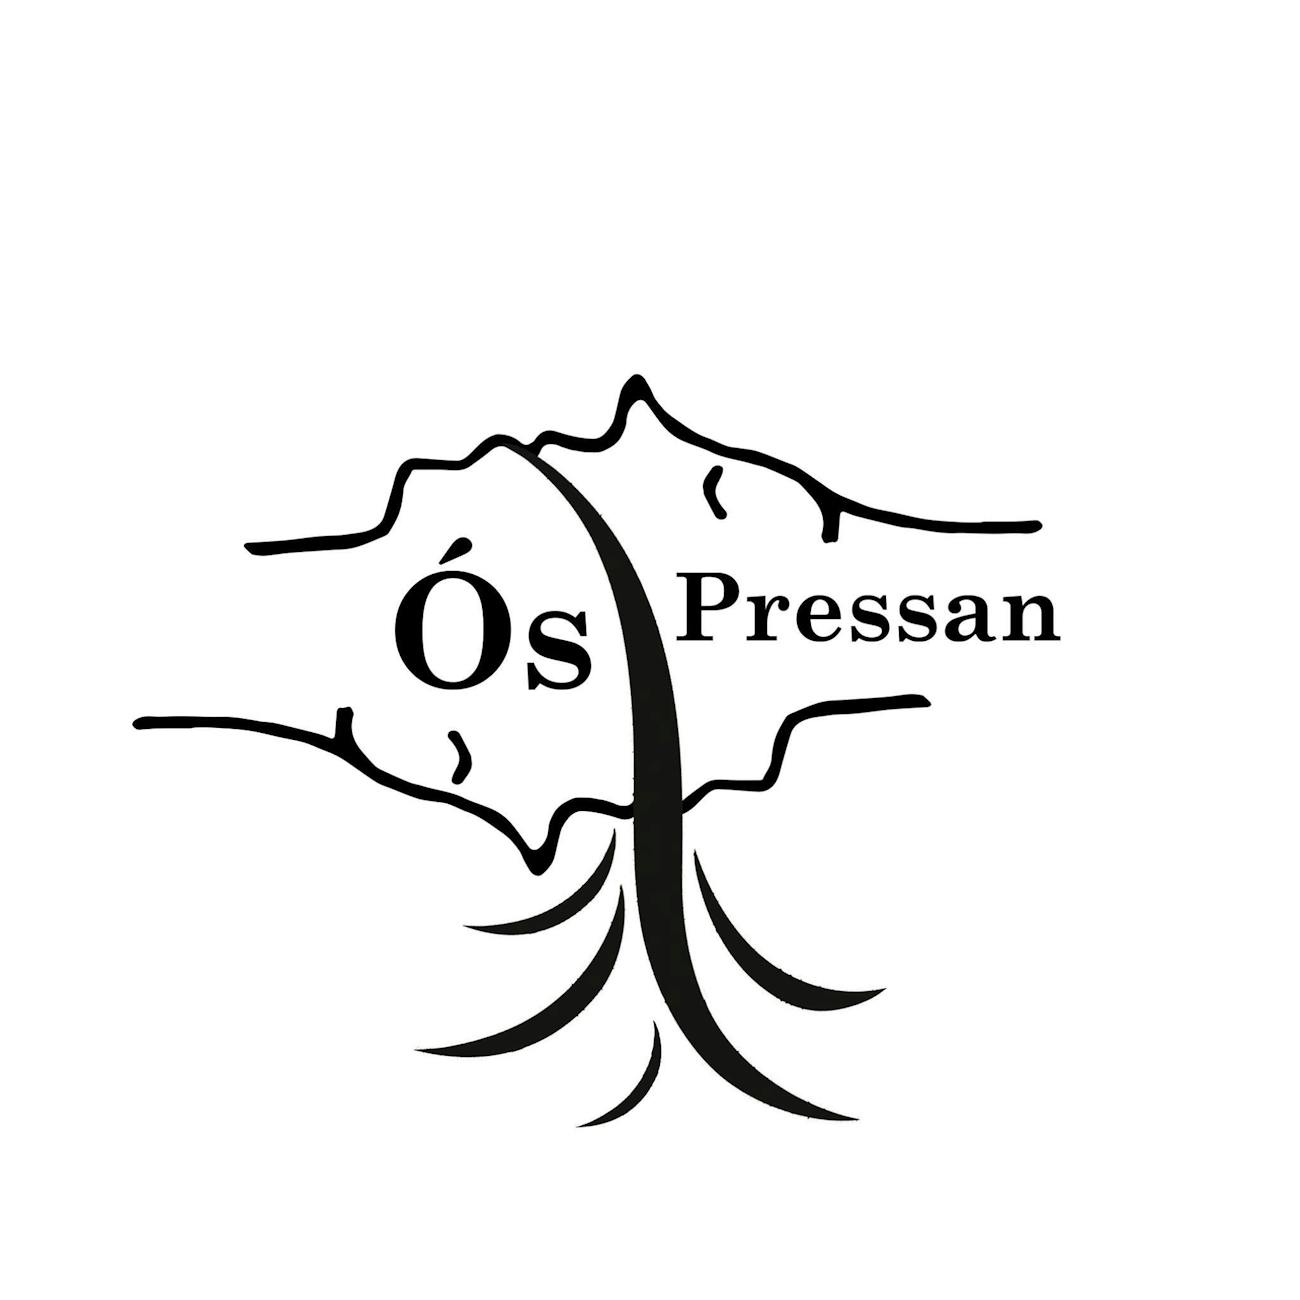 Black and white logo. The words are Ós Pressan. Between the words come lines that then flowing down. Above and below the words are lines, like the outlines of a mountain.